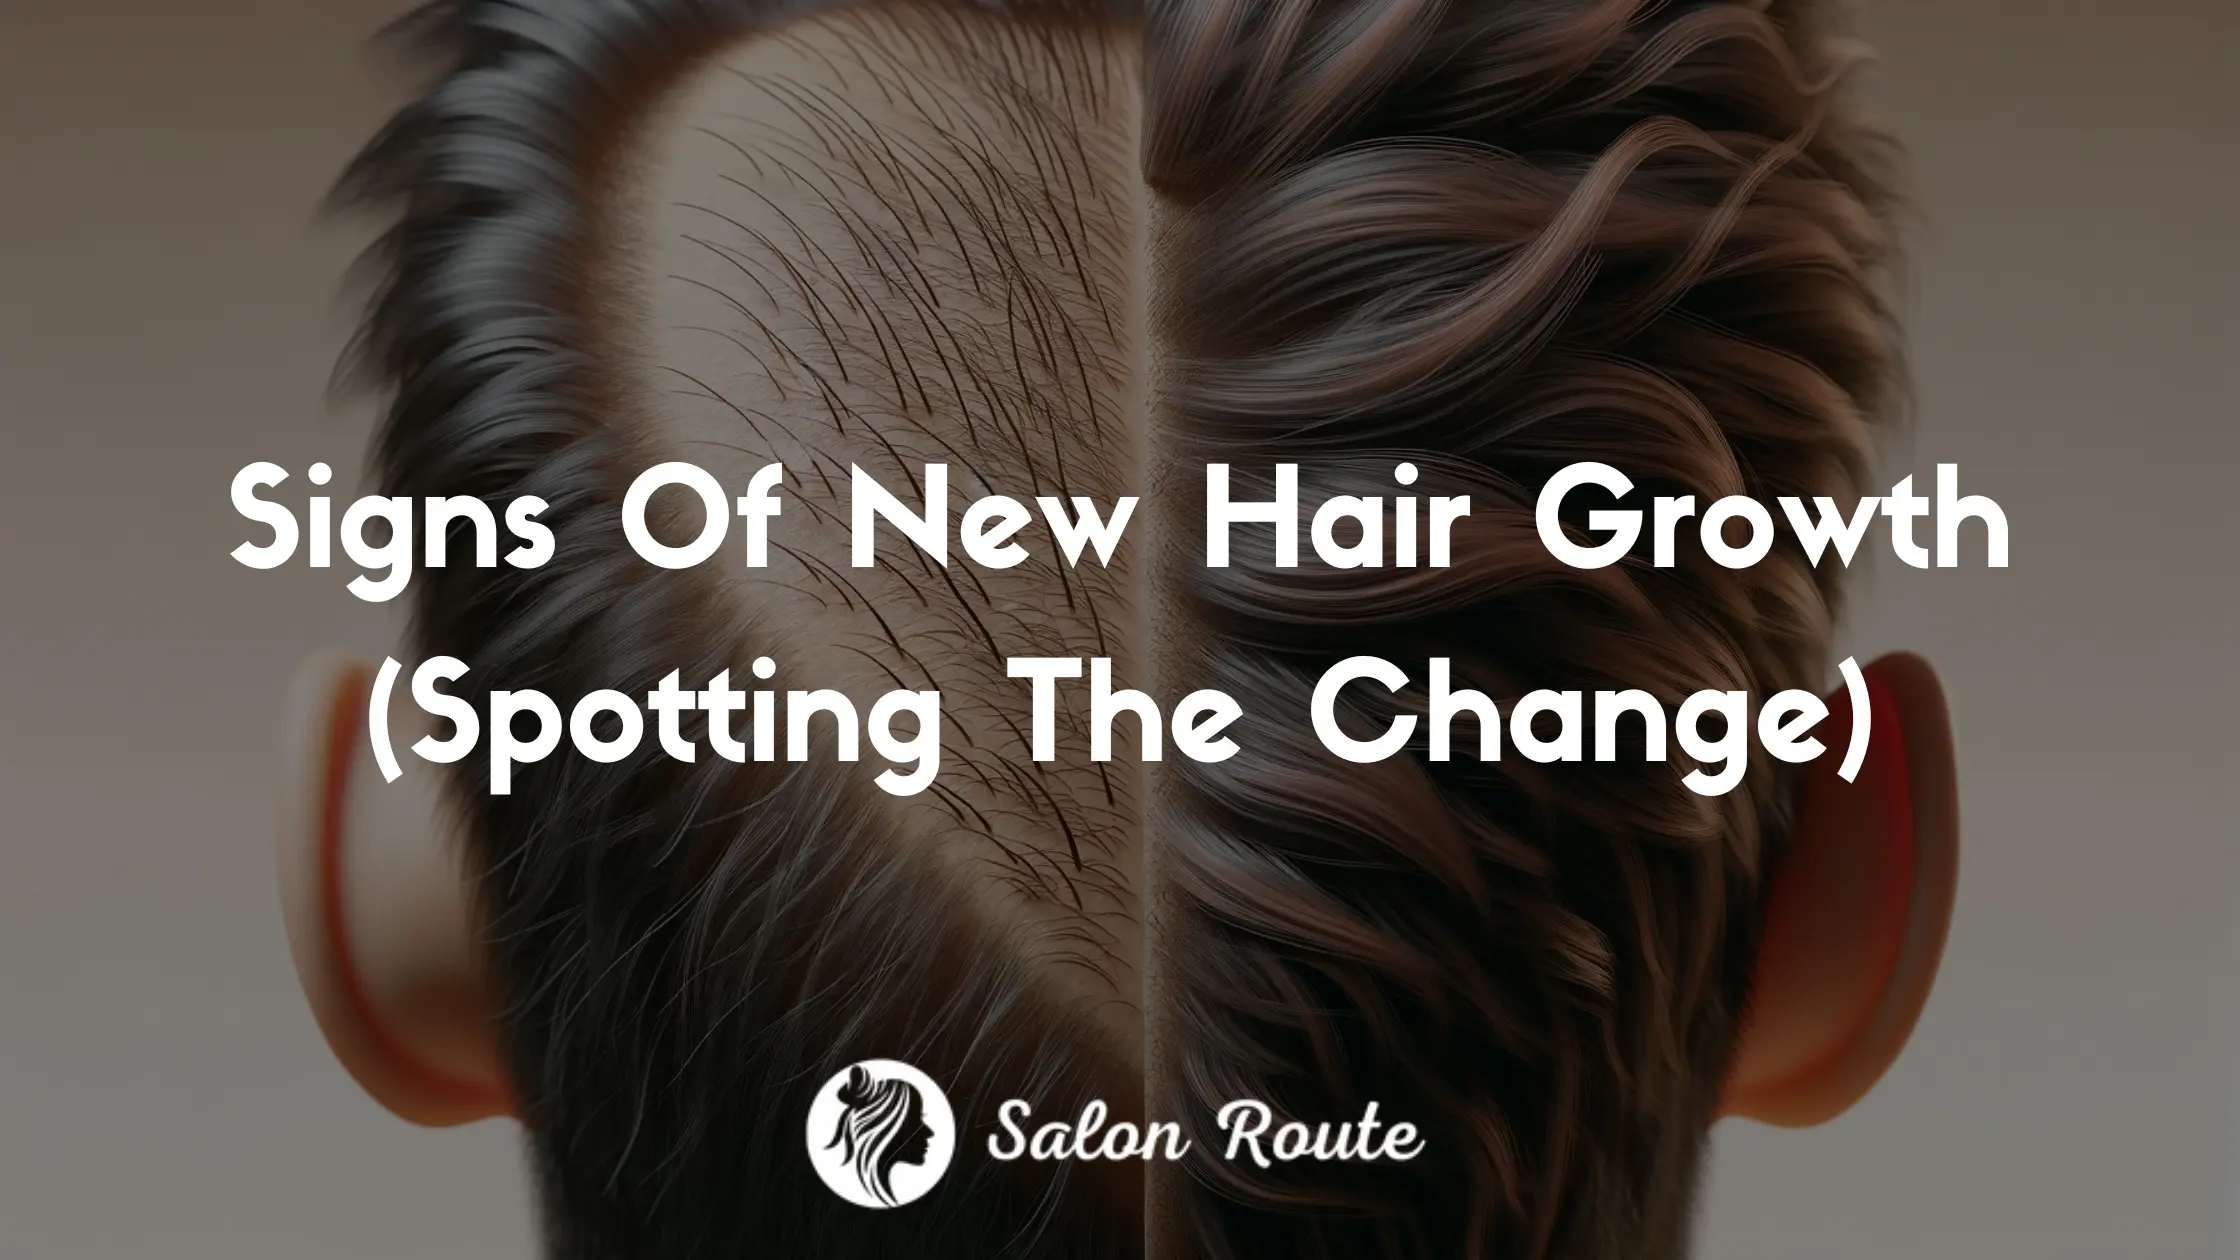 Signs Of New Hair Growth (Spotting The Change)